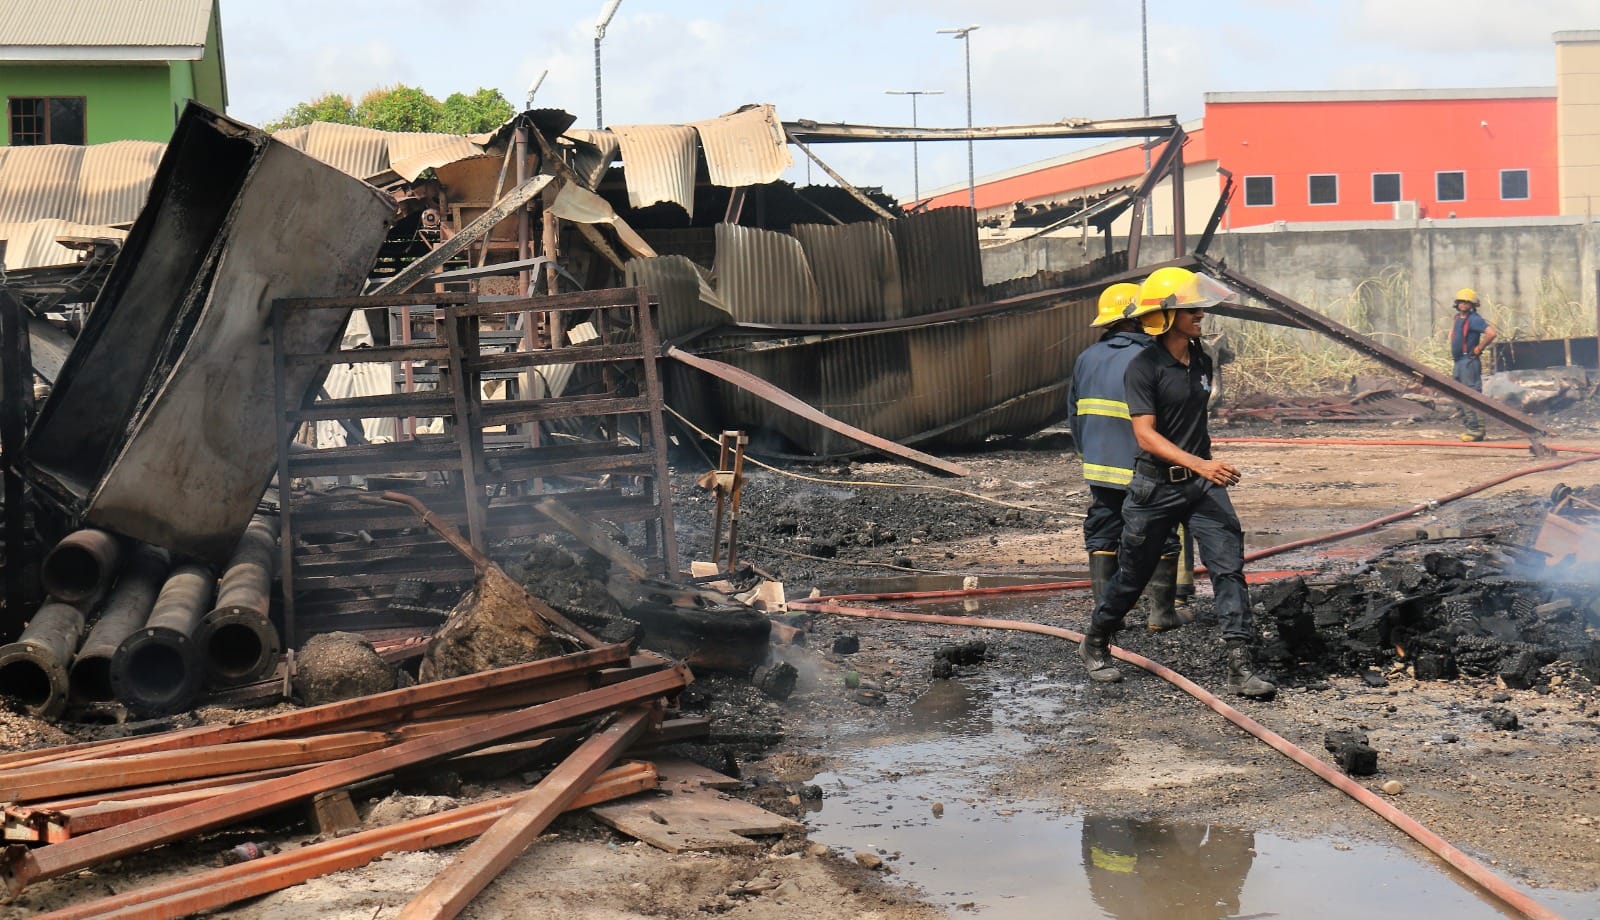 Losses estimated at $2M after fire guts pallet and brick factory in Sangre Grande